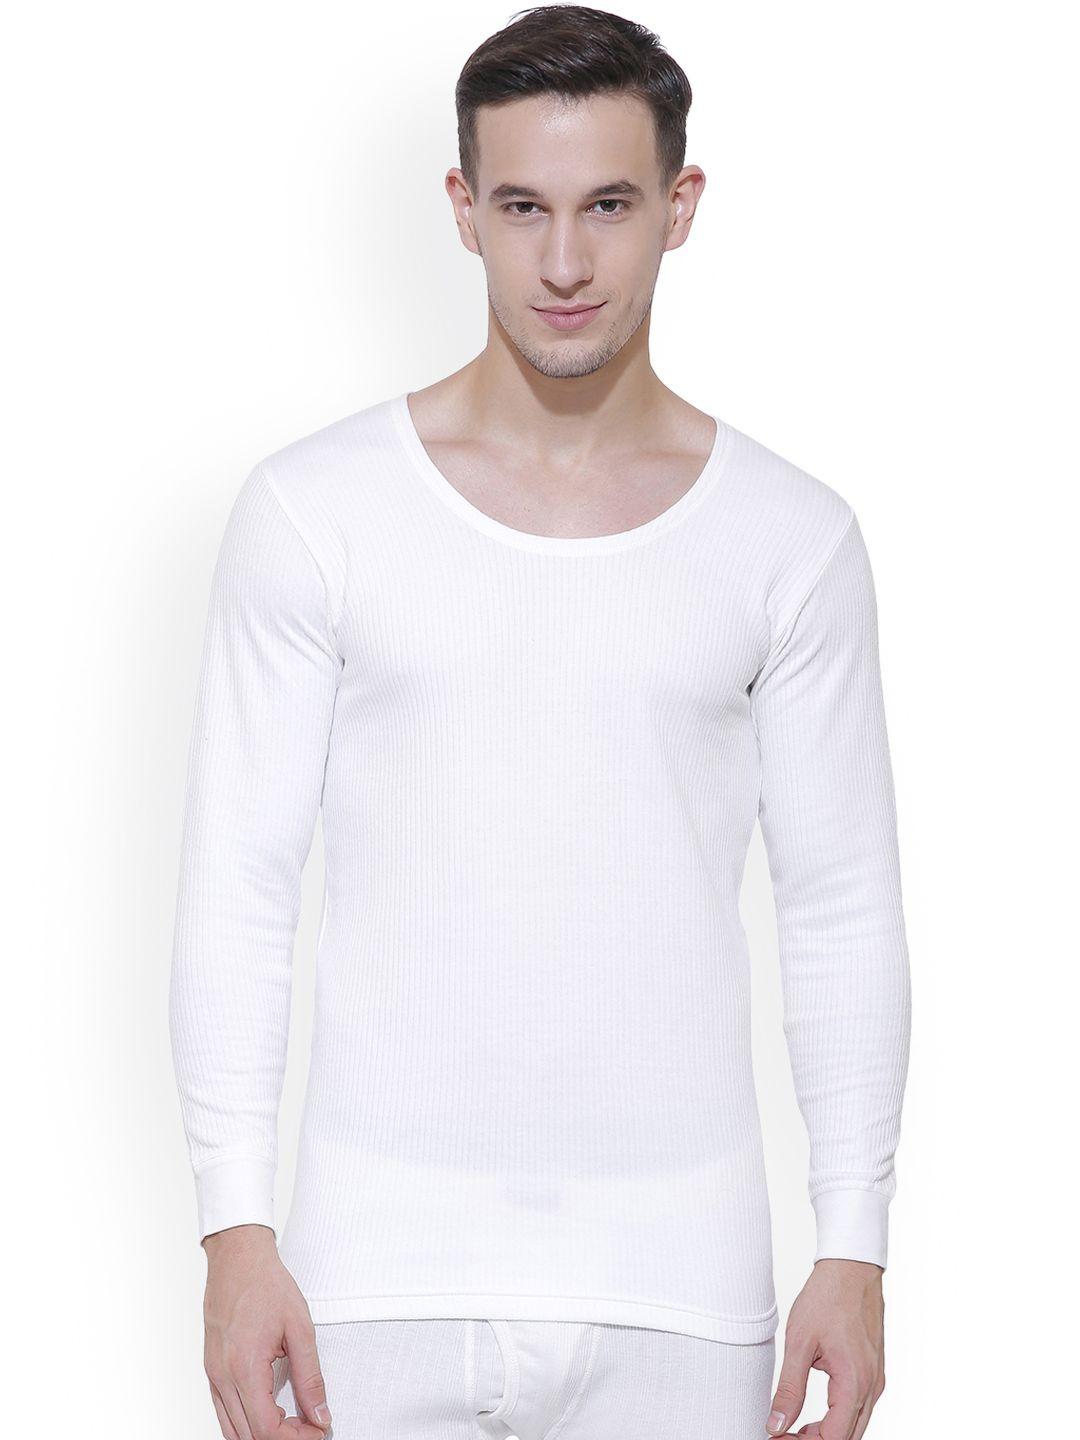 bodycare insider men off-white solid thermal top b101_95